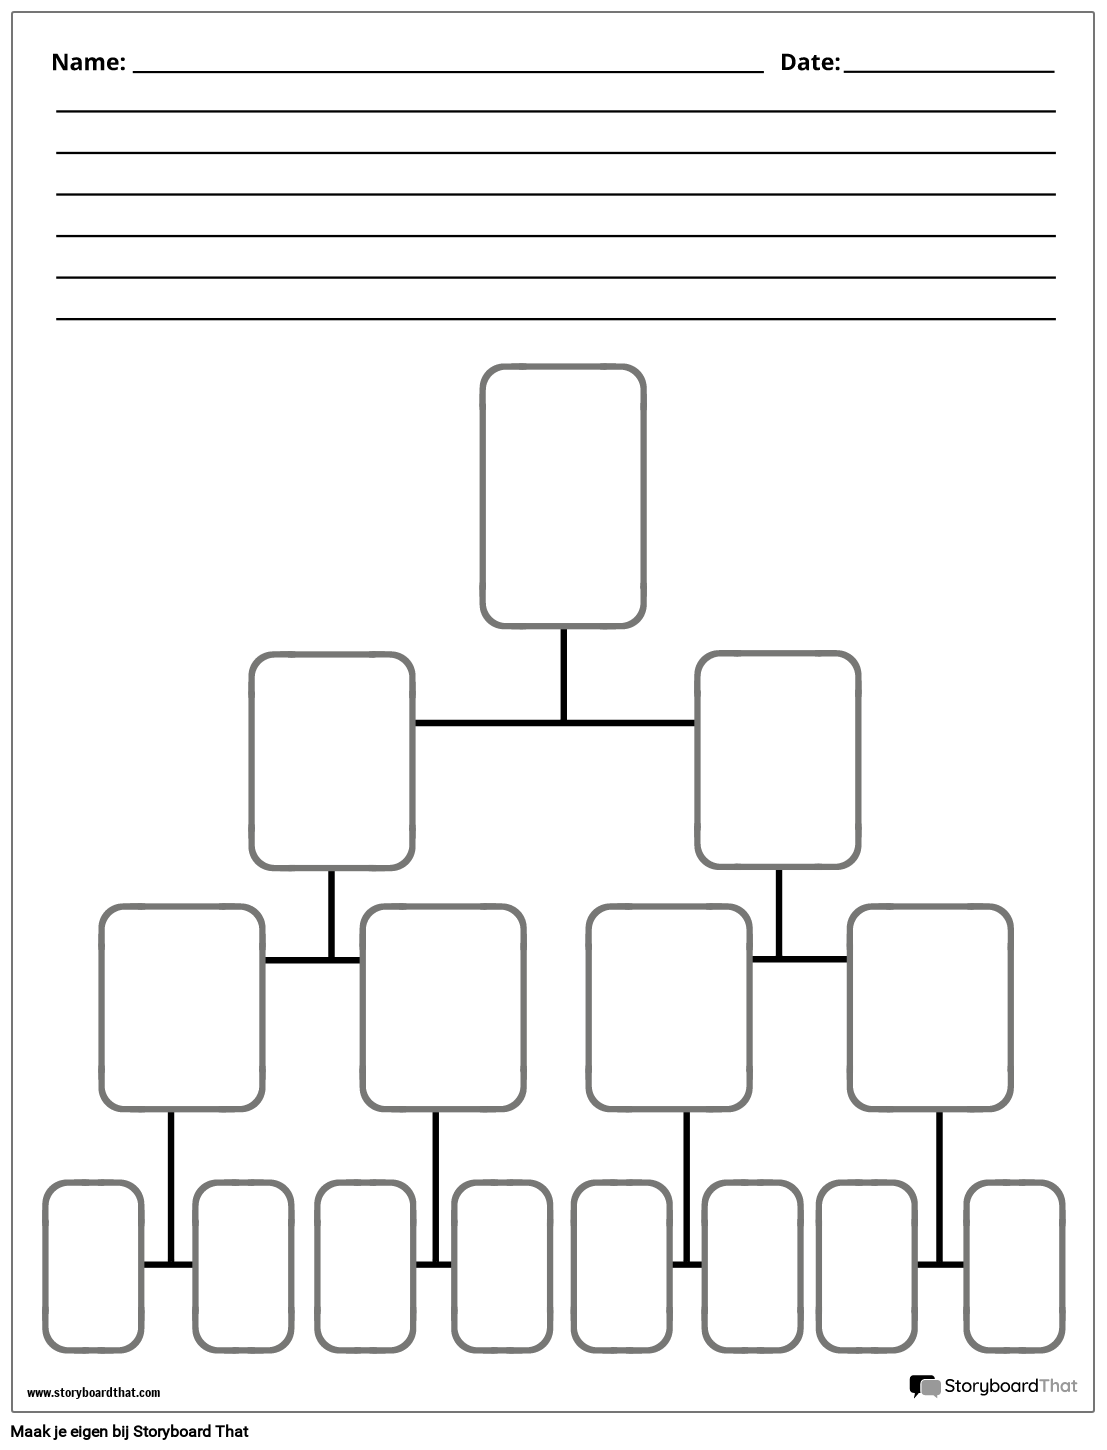 New Create Page Tree Diagram Template 4 (zwart-wit)